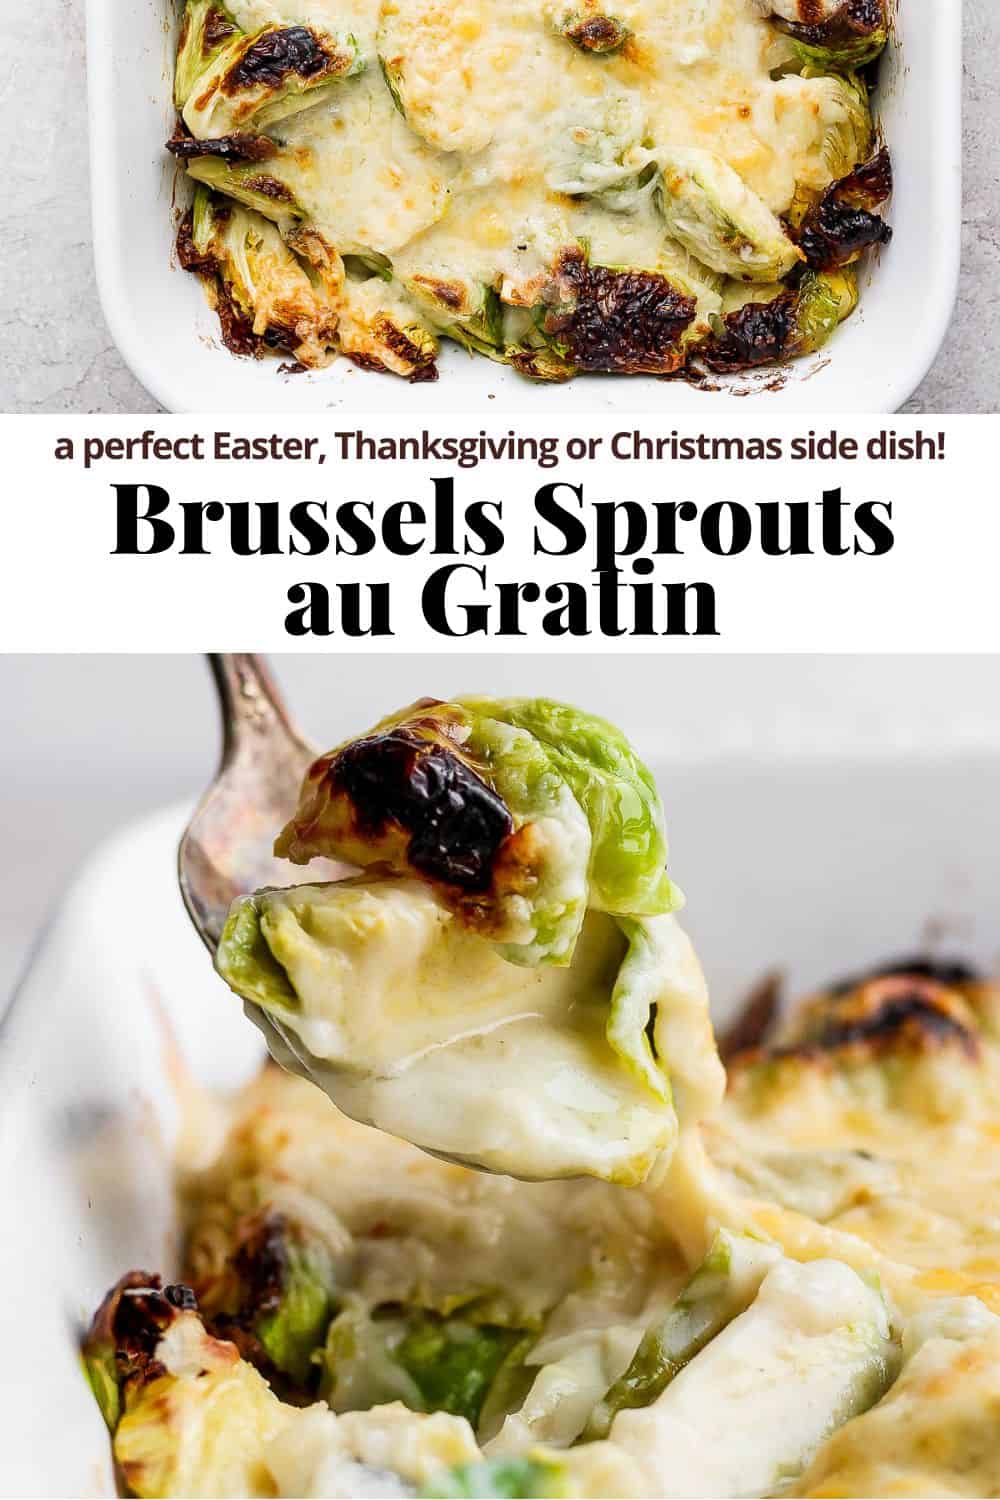 Pinterest image showing the brussels sprouts au gratin and the recipe title.